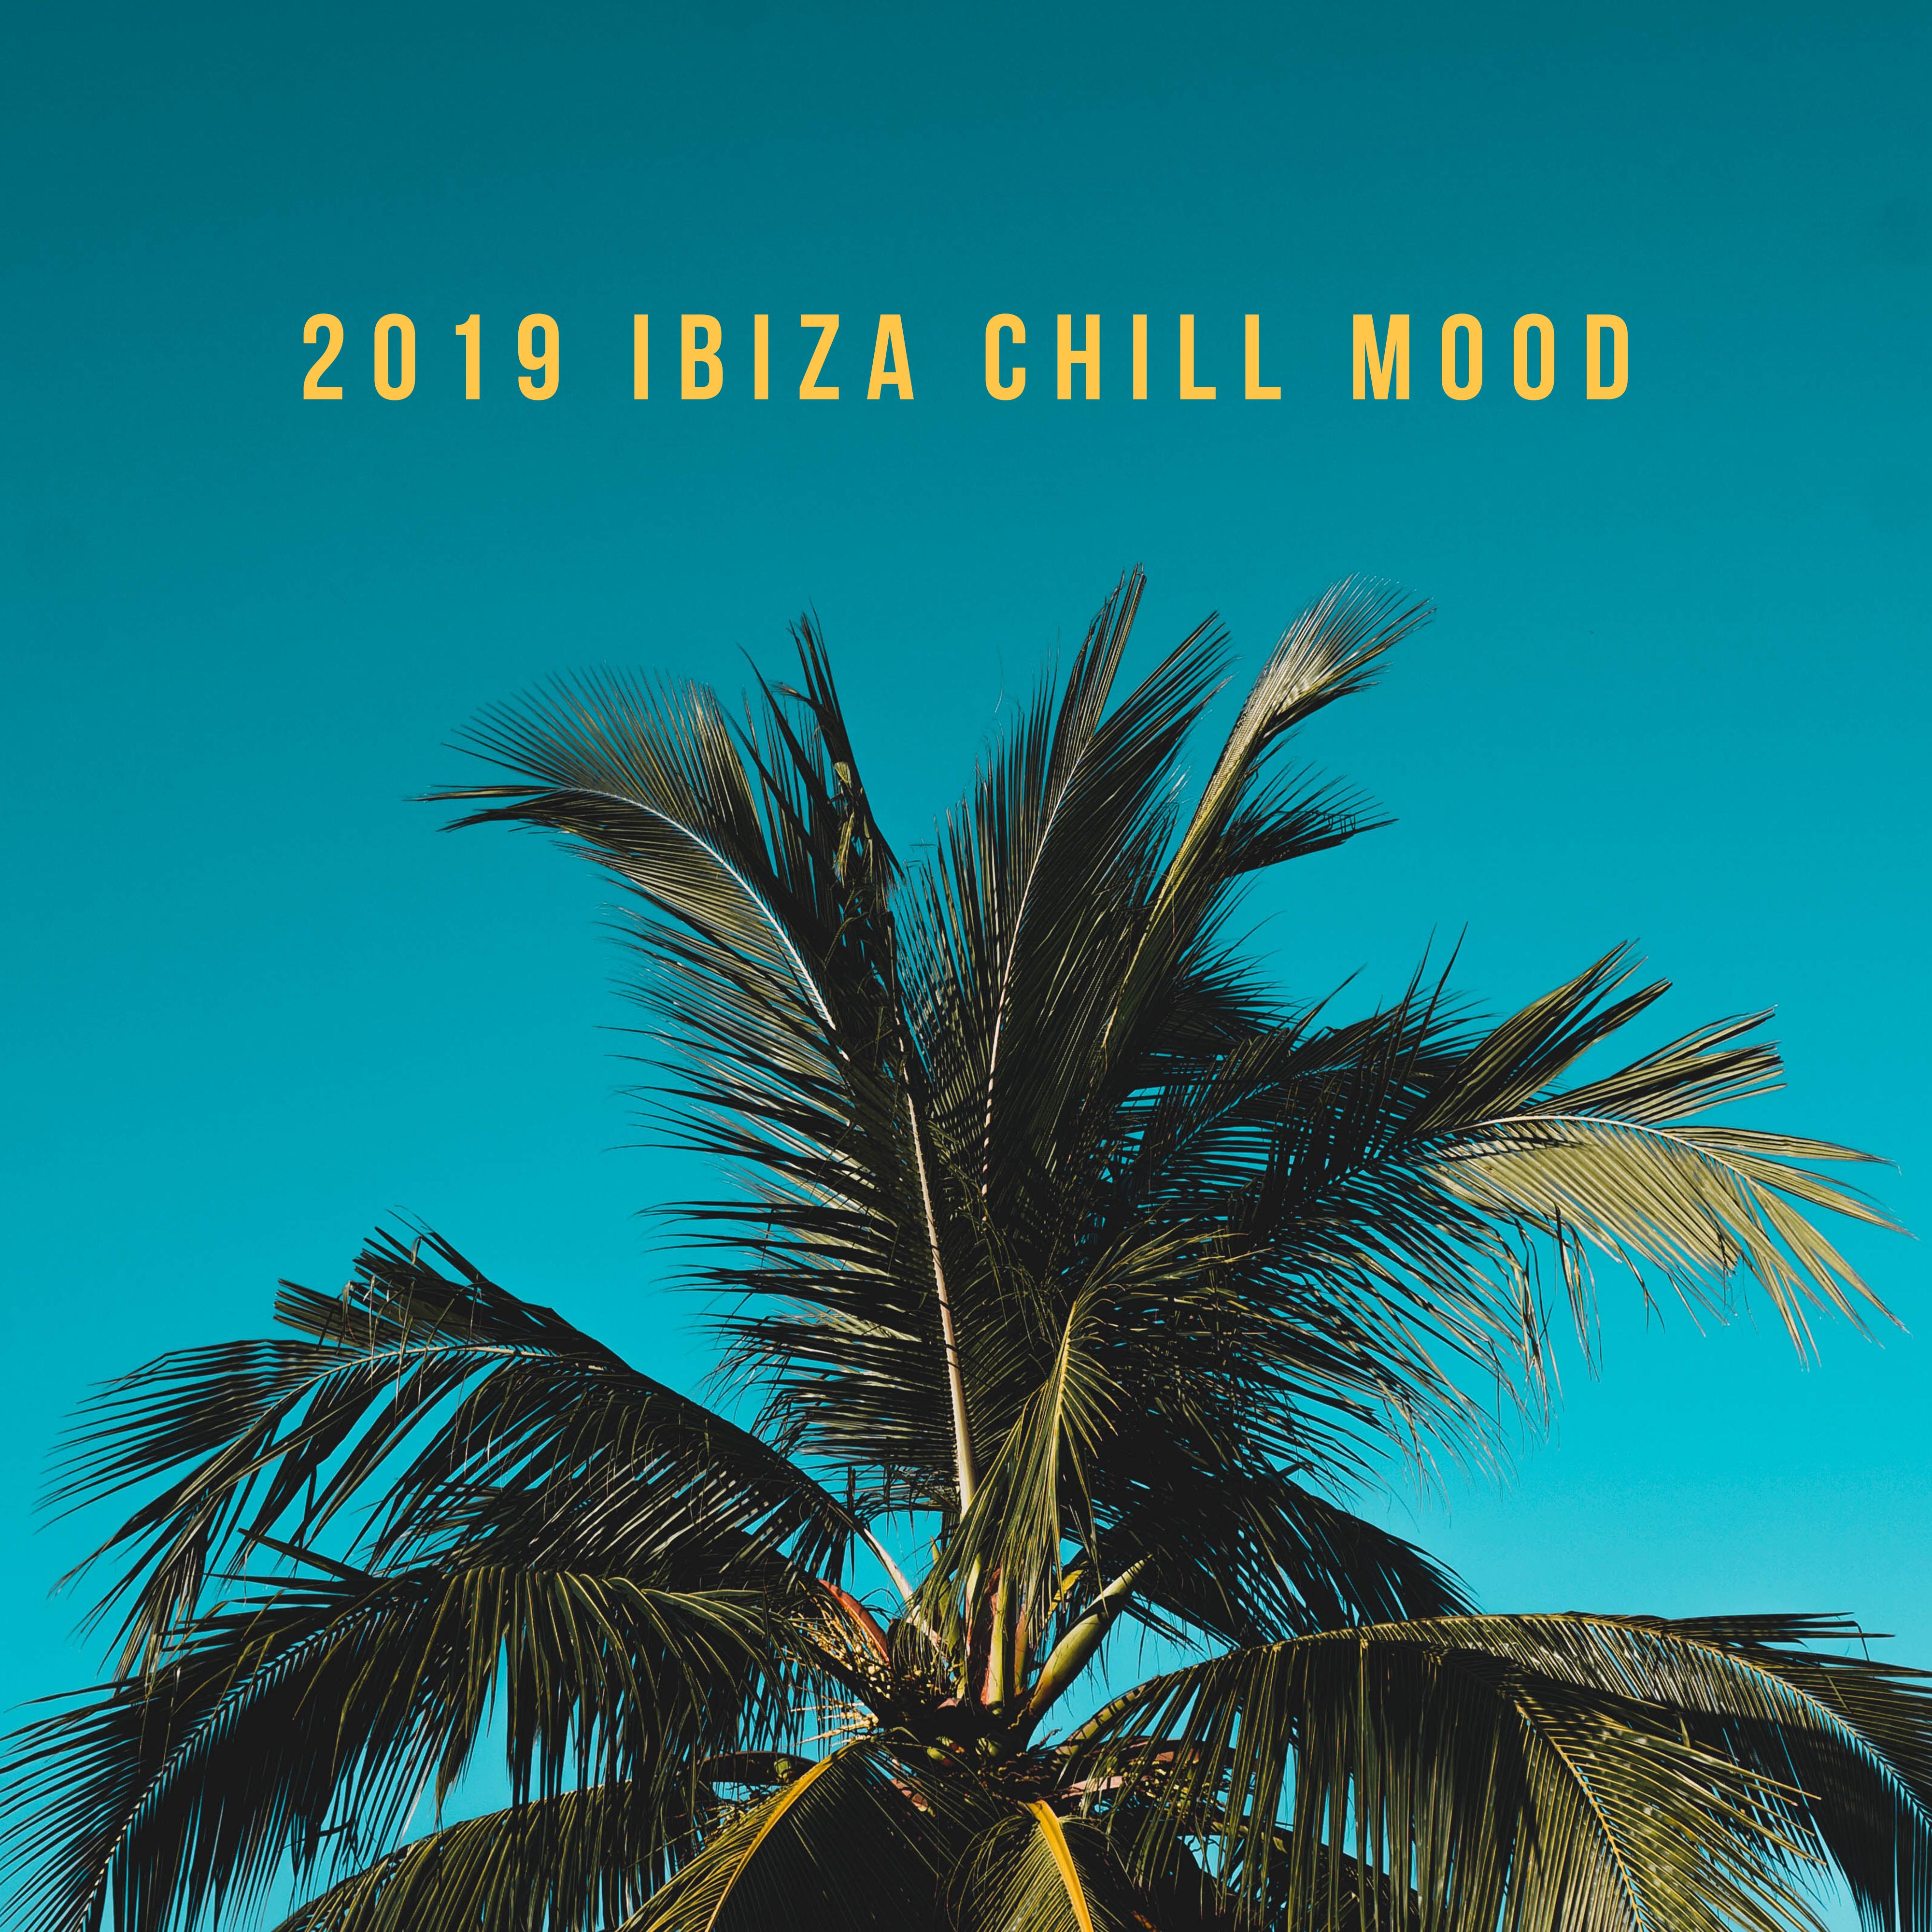 2019 Ibiza Chill Mood - Best Chillout Mix, Pure Relax, Summer Hits, Chillout Vibes, Ibiza Beach, Chill Out 2019